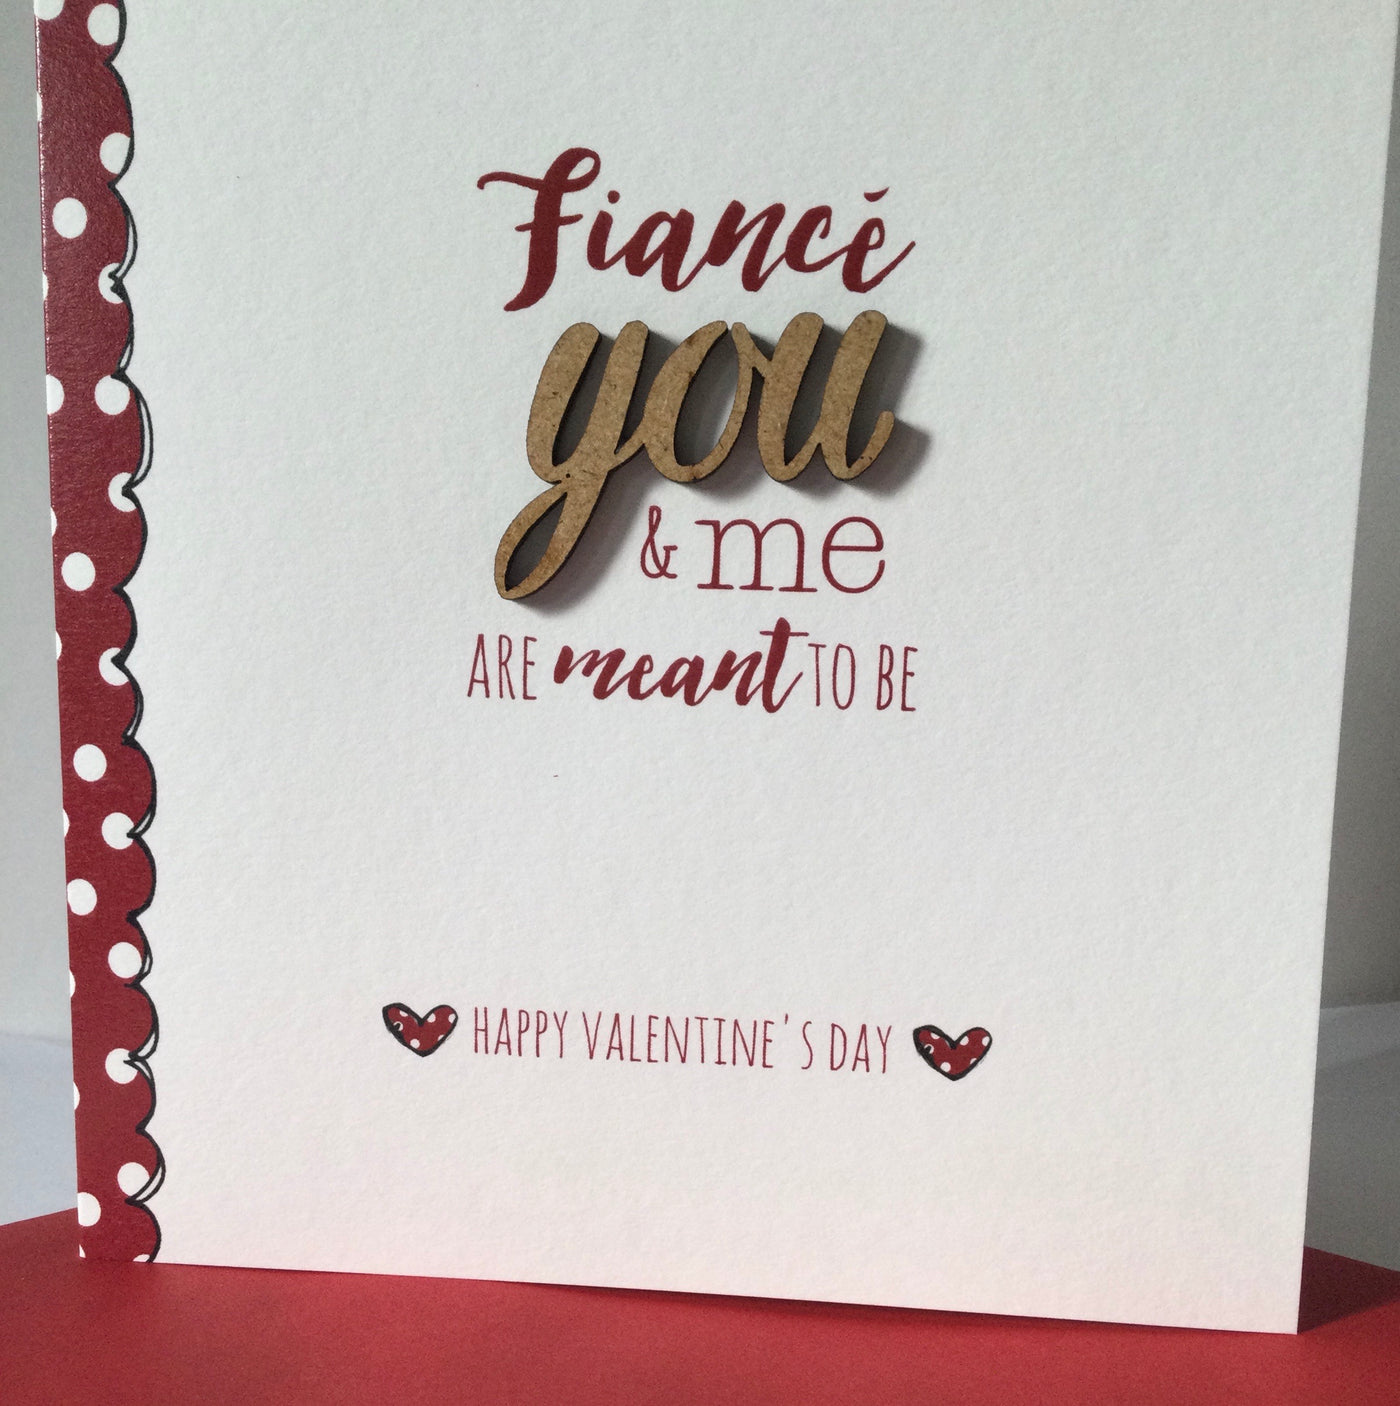 Tracey Russell Fiance You & Me Are Meant To Be Valentines Card